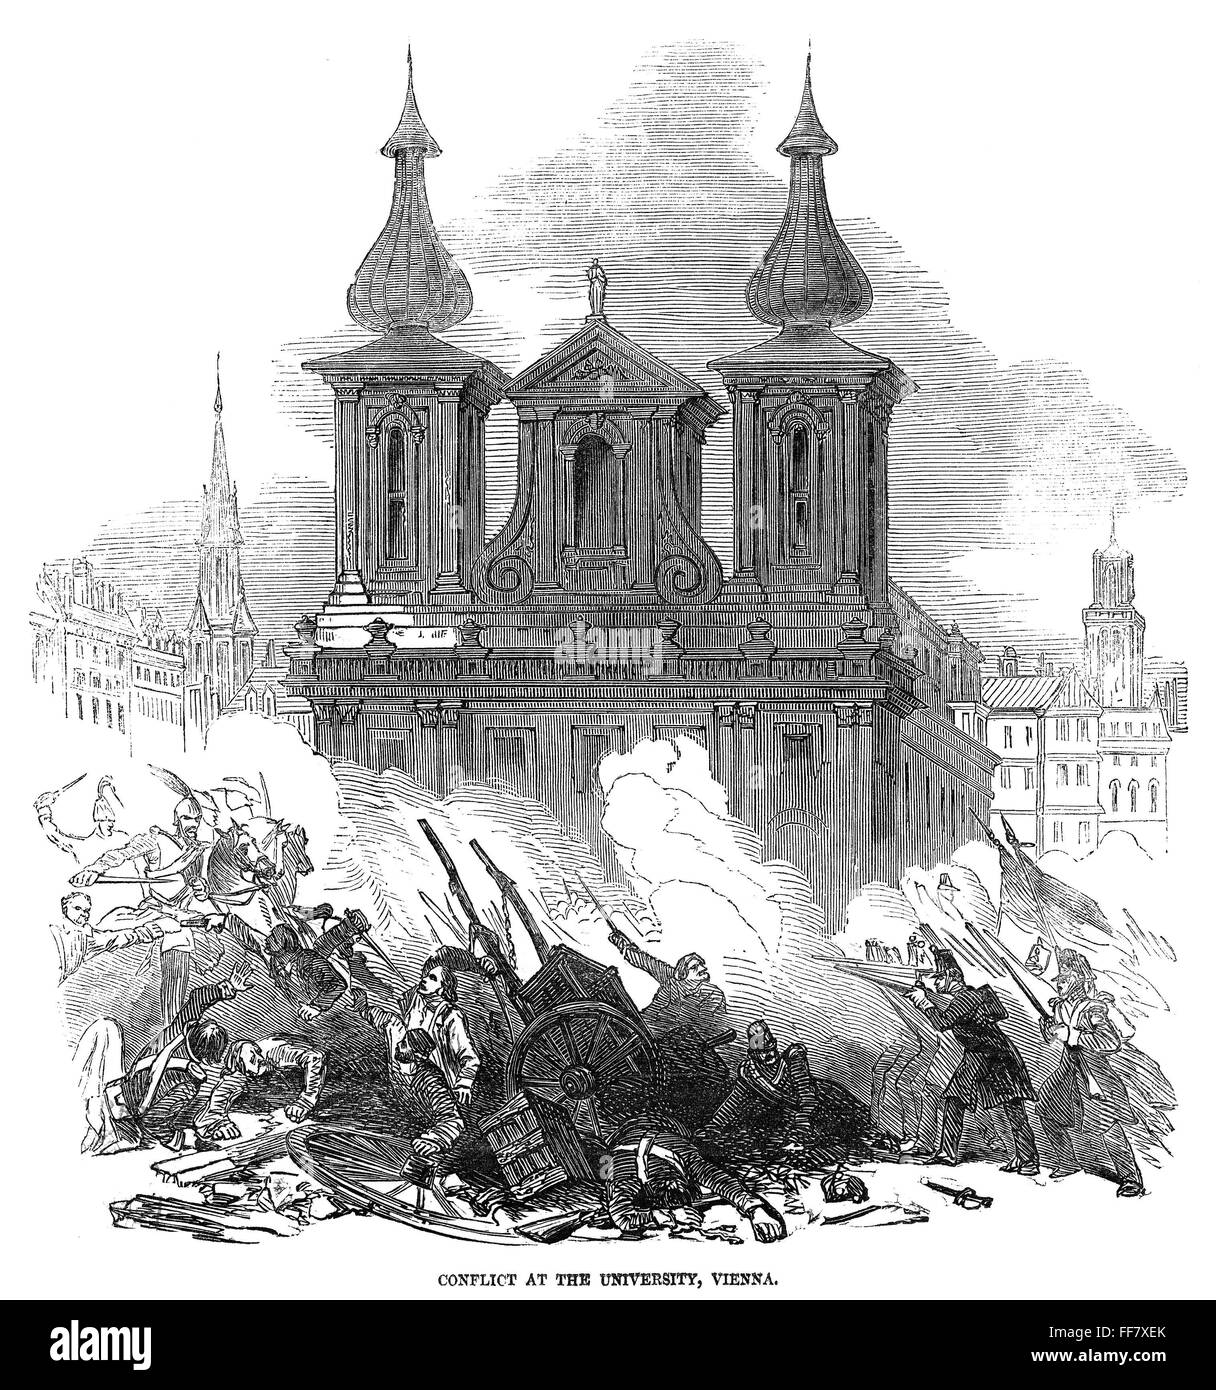 AUSTRIAN REVOLUTION, 1848. Conflict at the University of Vienna, Austria, during the Revolution of 1848. Wood engraving from a contemporary English newspaper. Stock Photo